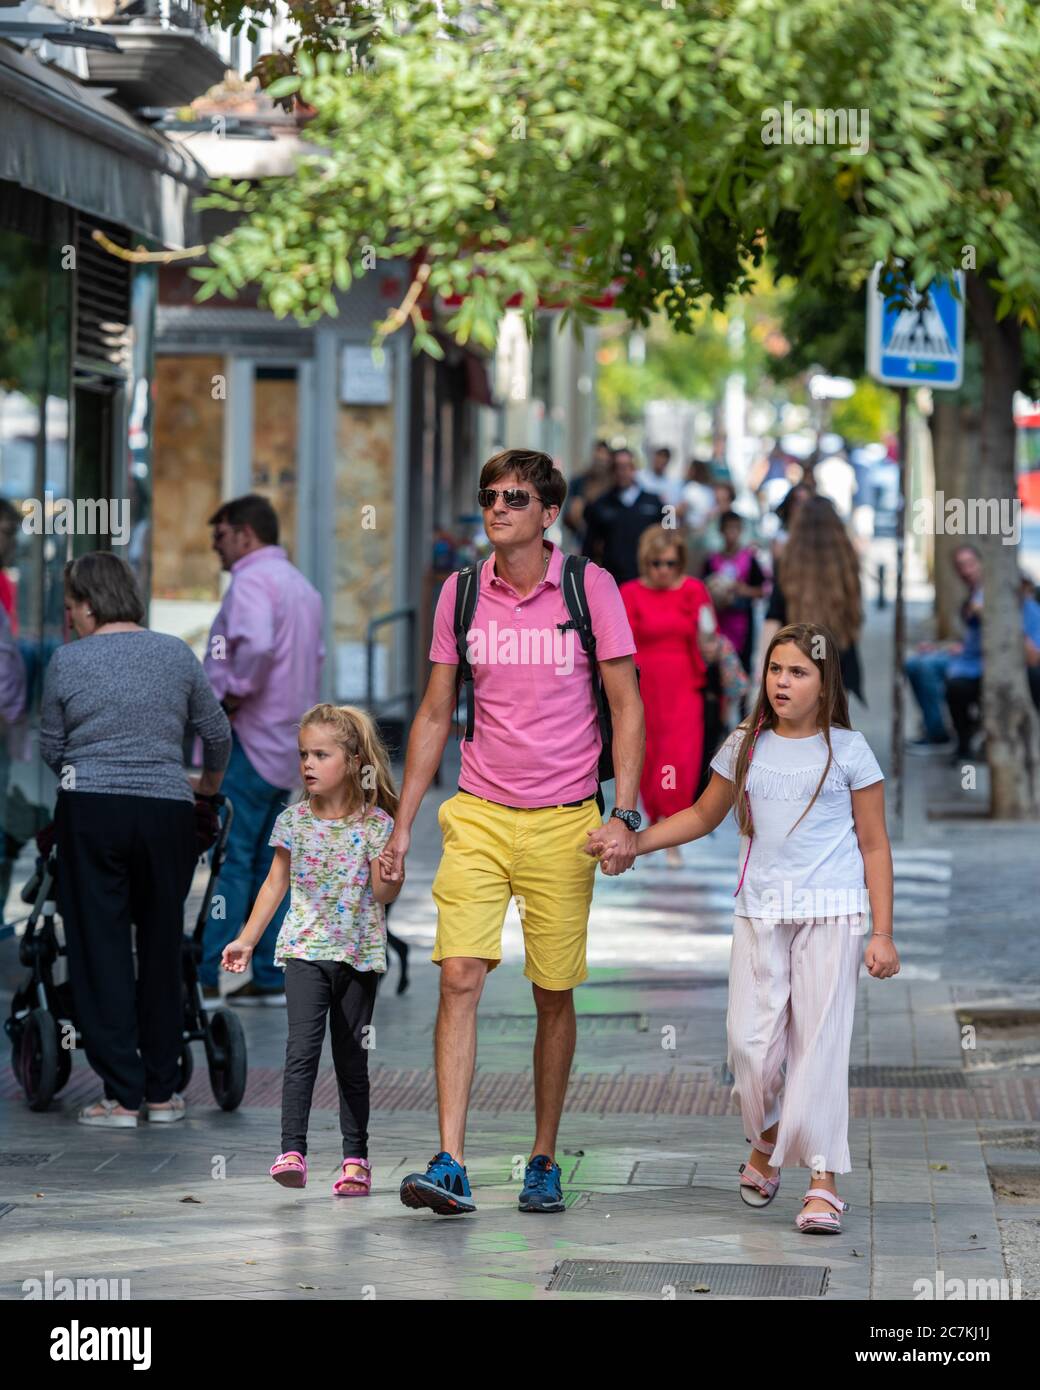 A colourful father and his two young daughters enjoying a Saturday outing in Calle San Juan de Dios, Granada§ Stock Photo